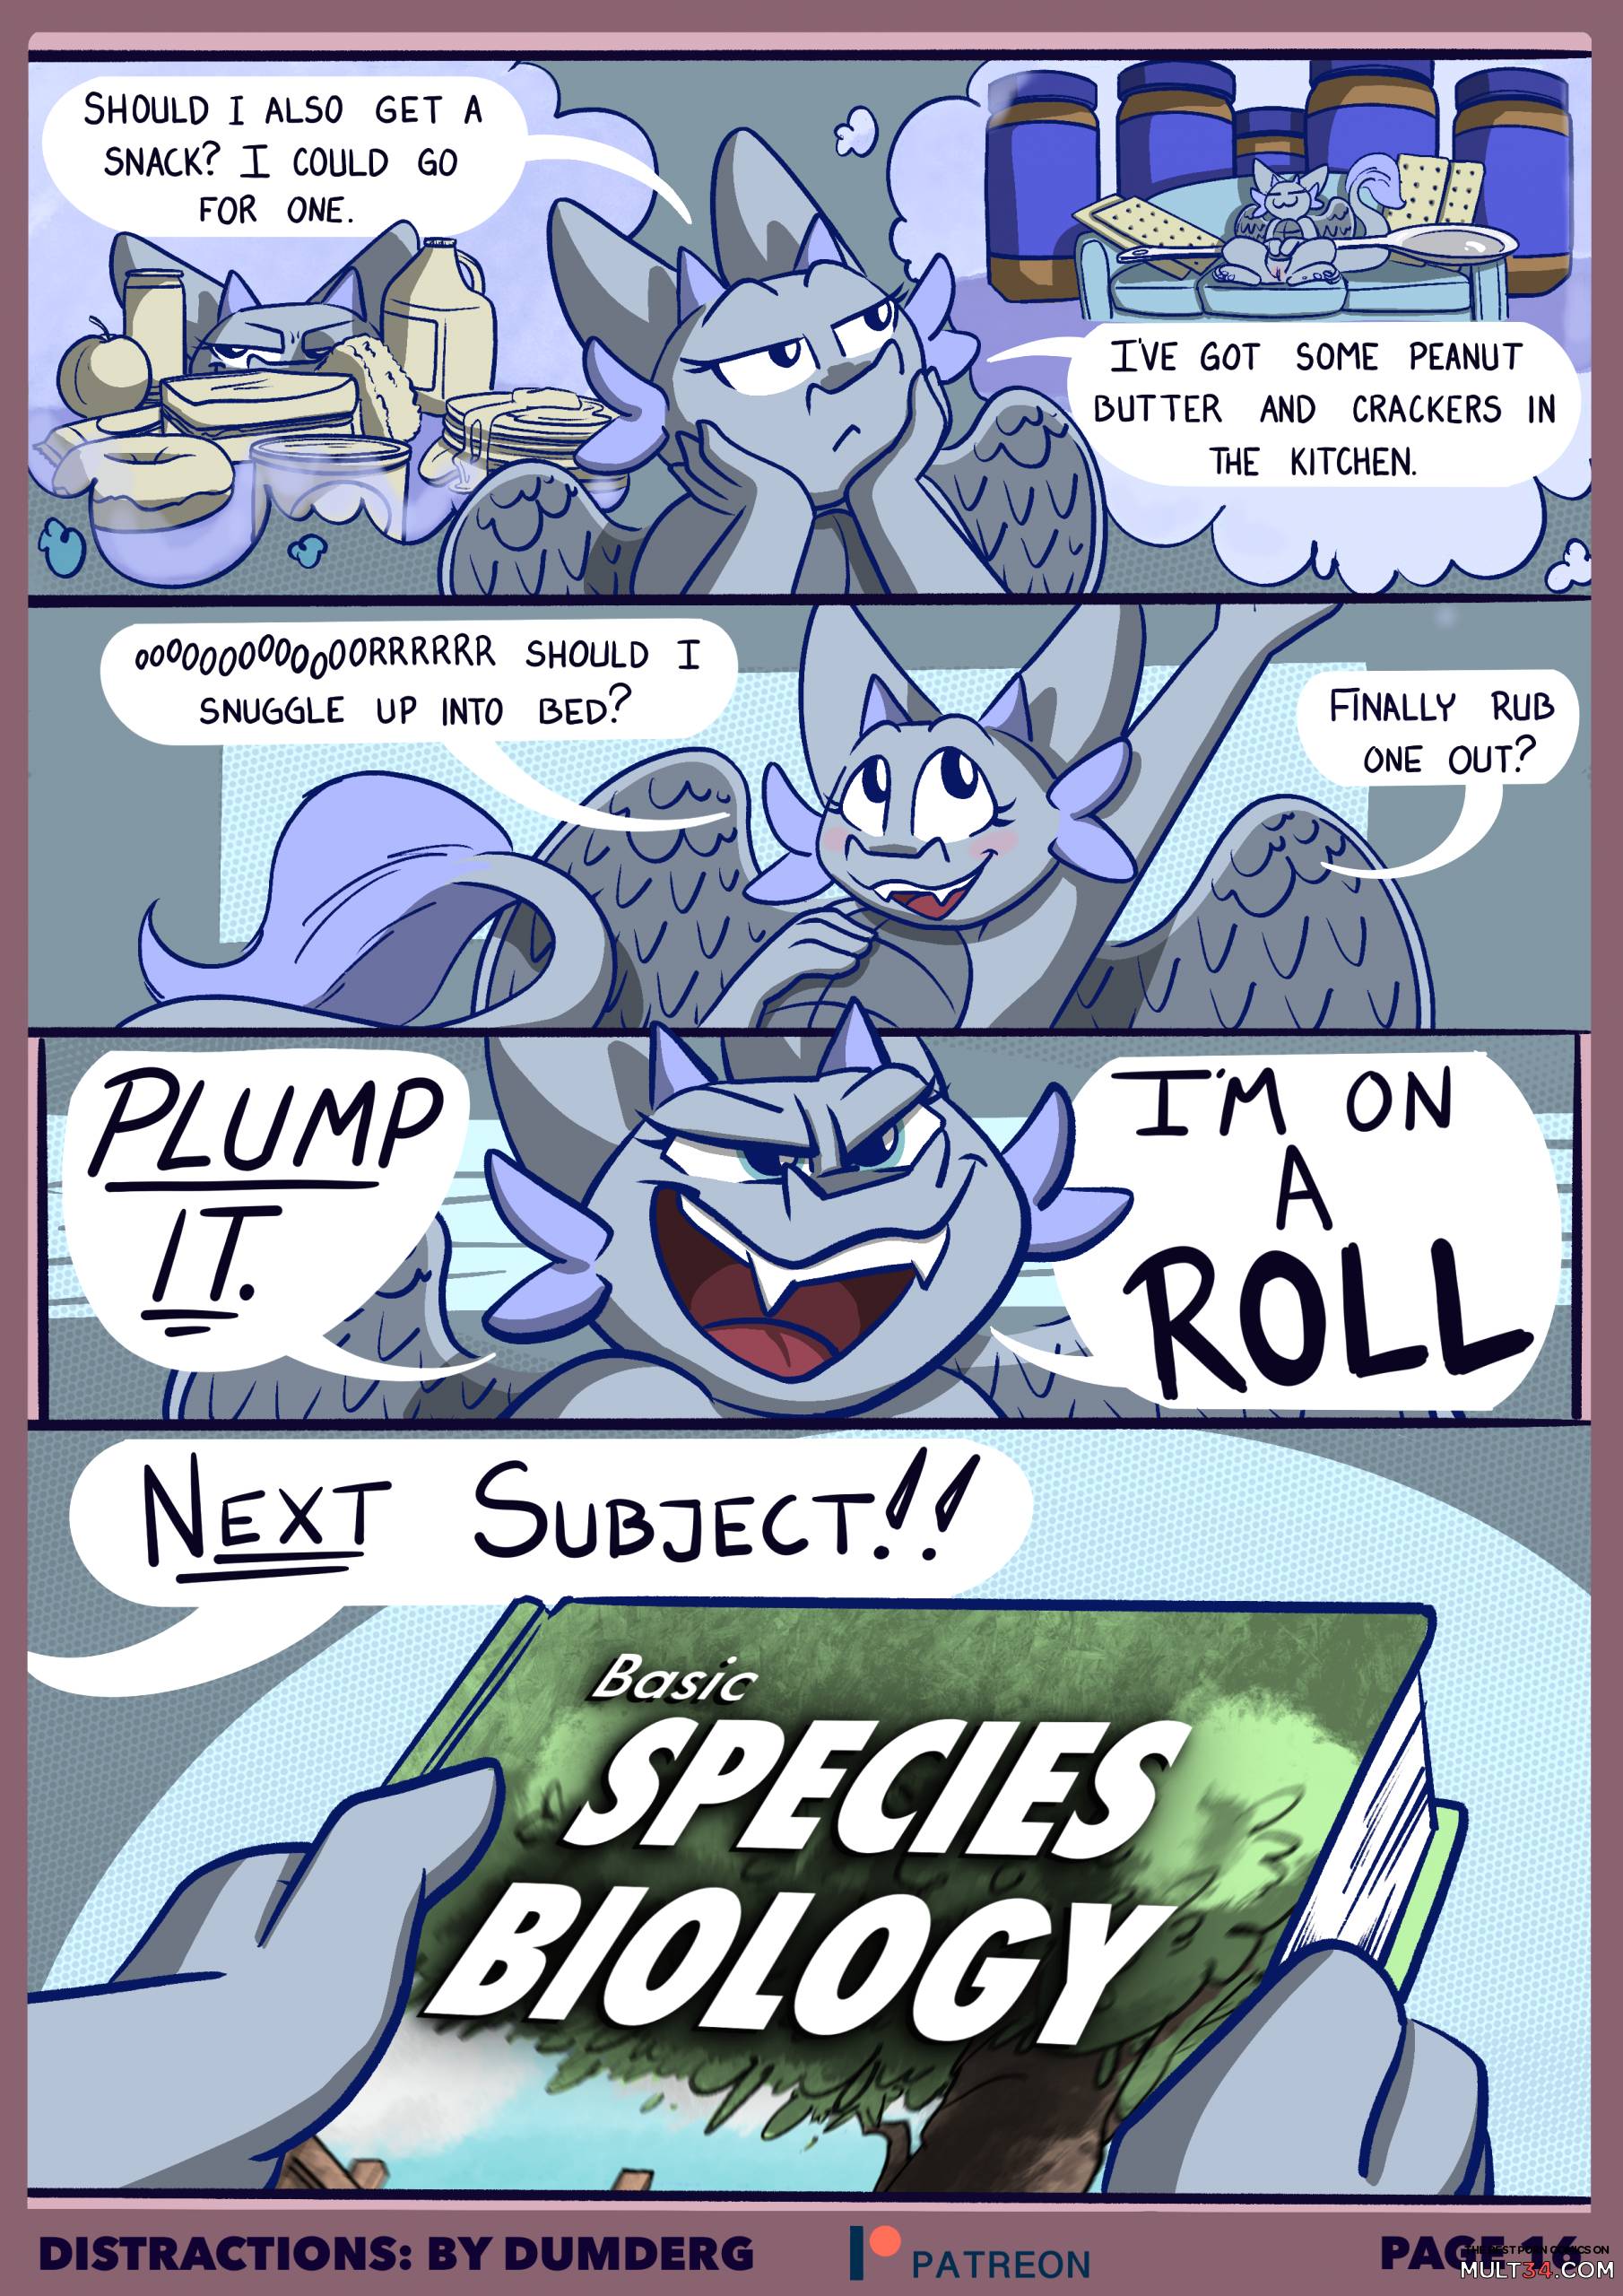 Distractions - DumDerg page 17